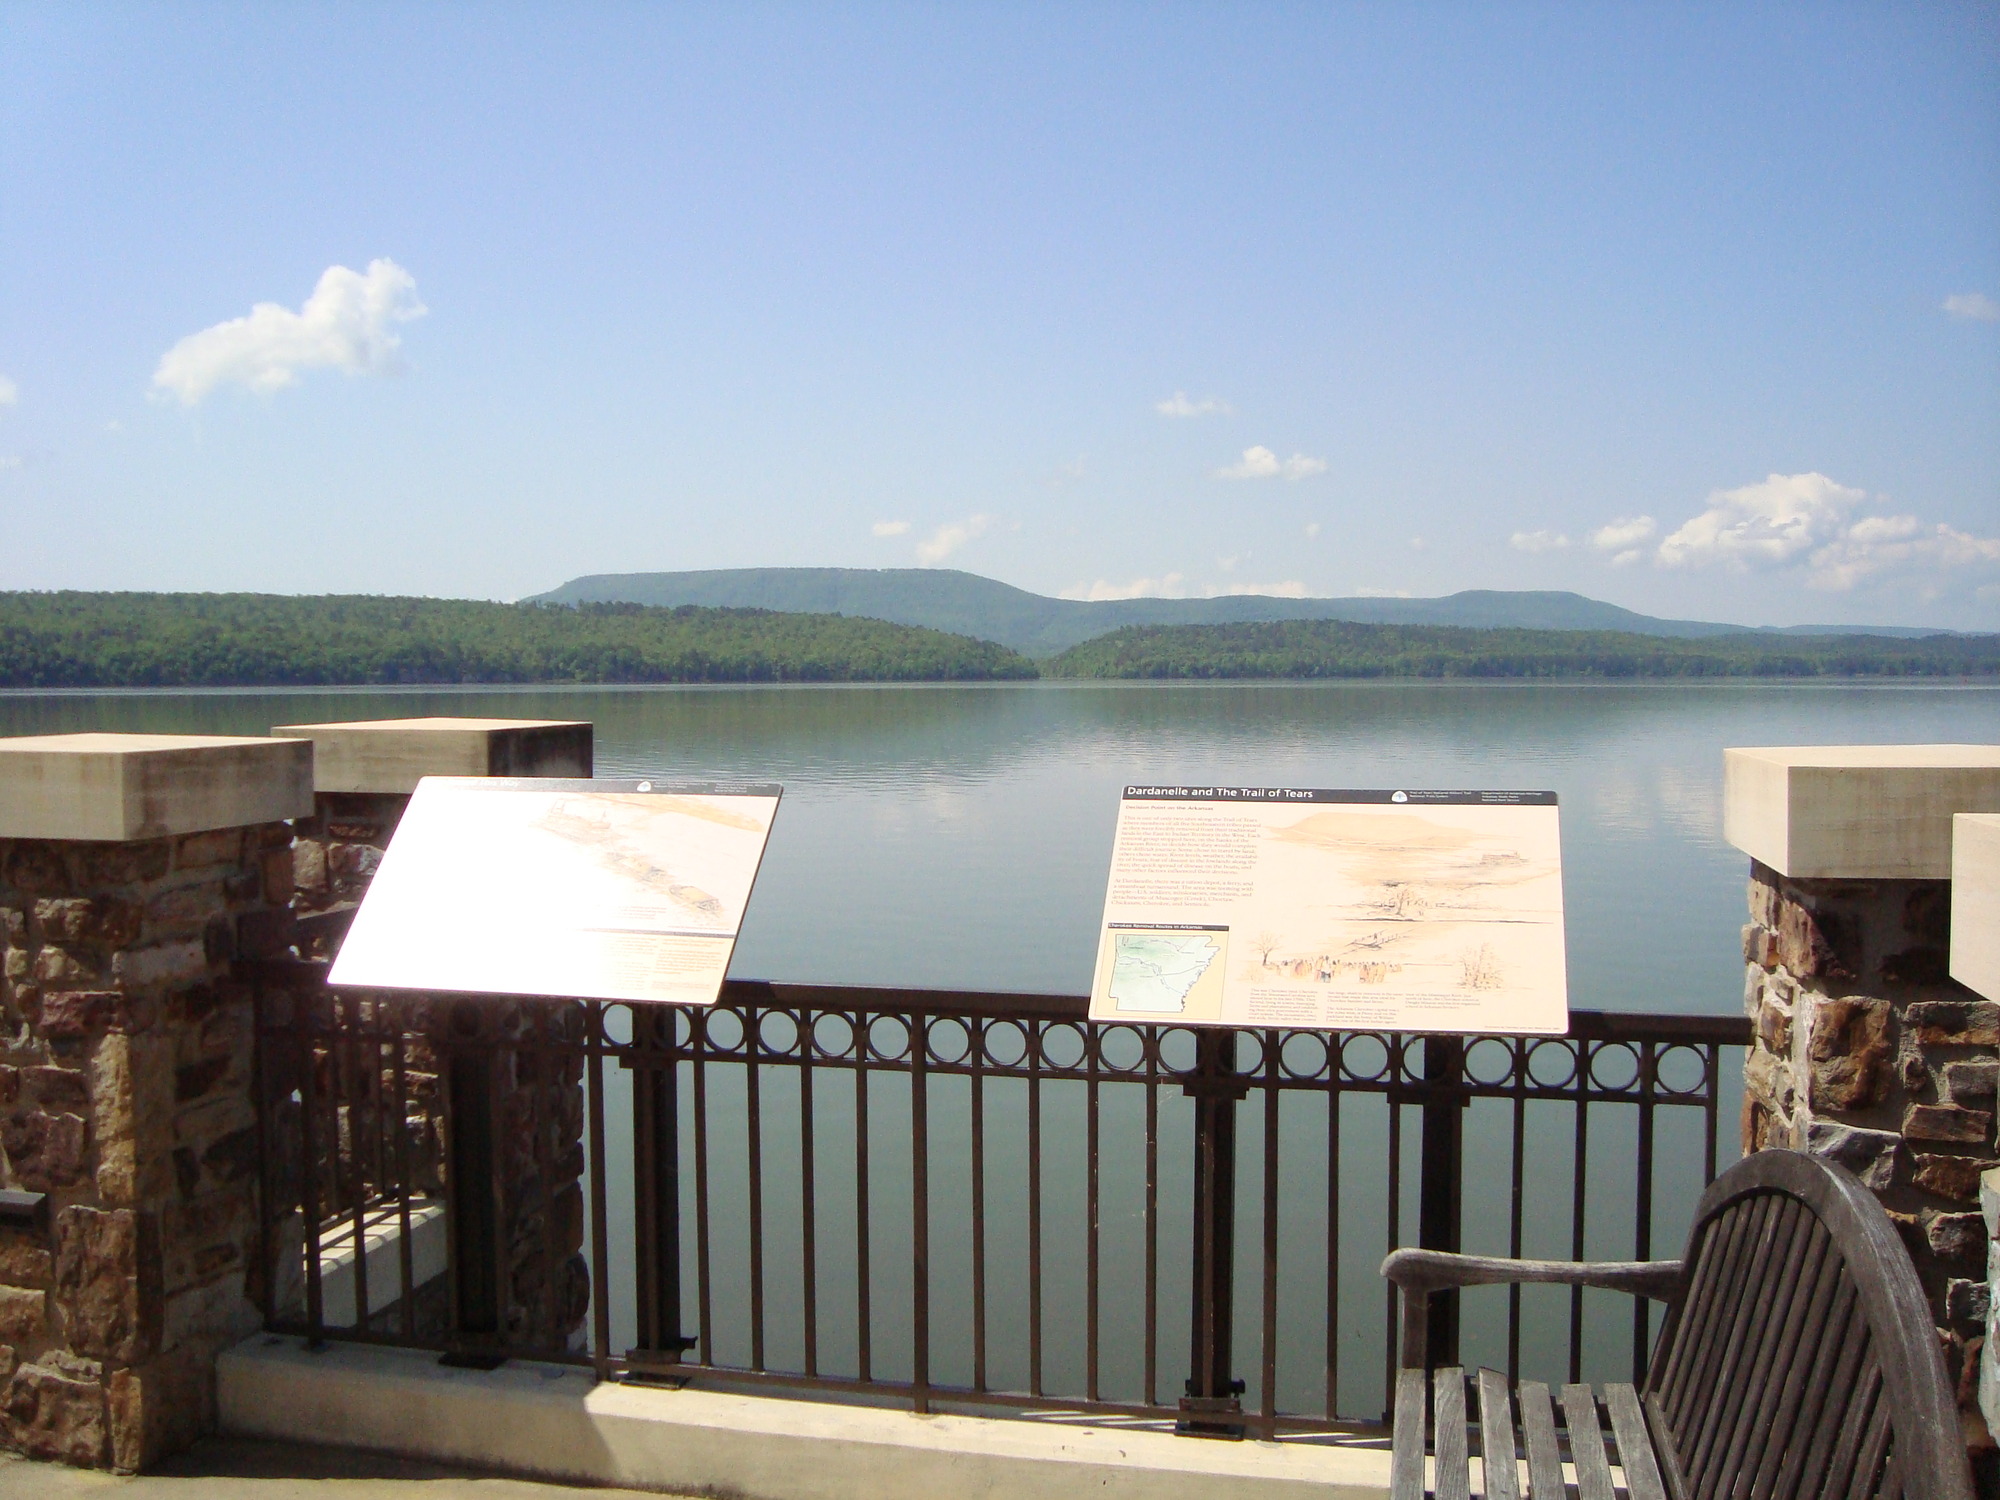 A park bench and waysides with a view at Lake Dardanelle State Park in Russellville, Arkansas